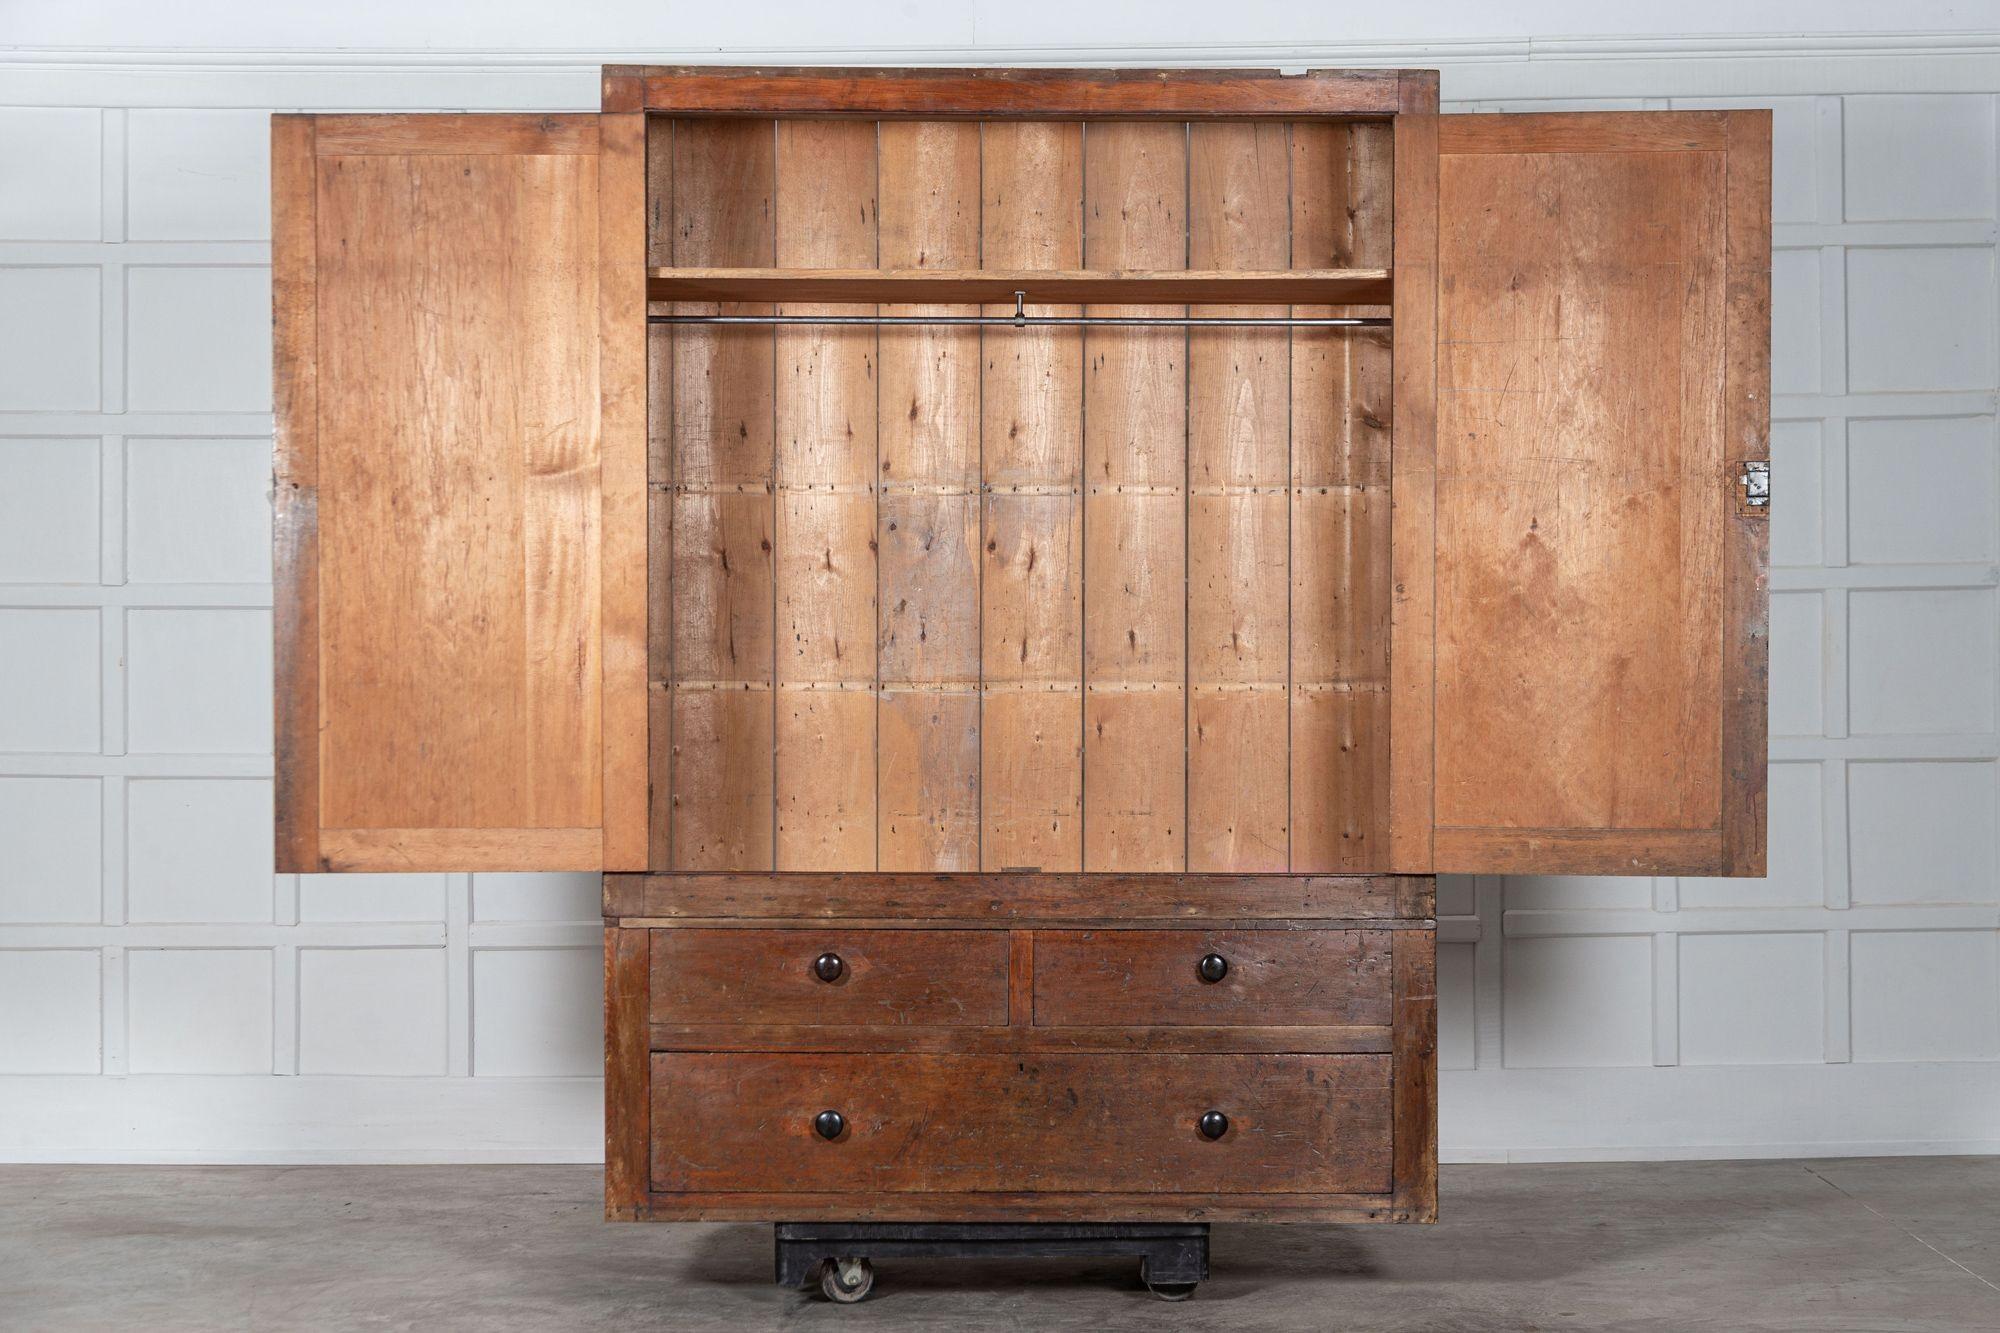 circa 1850
Large Irish Pine Housekeepers Cupboard/Armoire
Sourced from County Antrim
sku 1274
(two sections)
W151 x D52 x H208cm